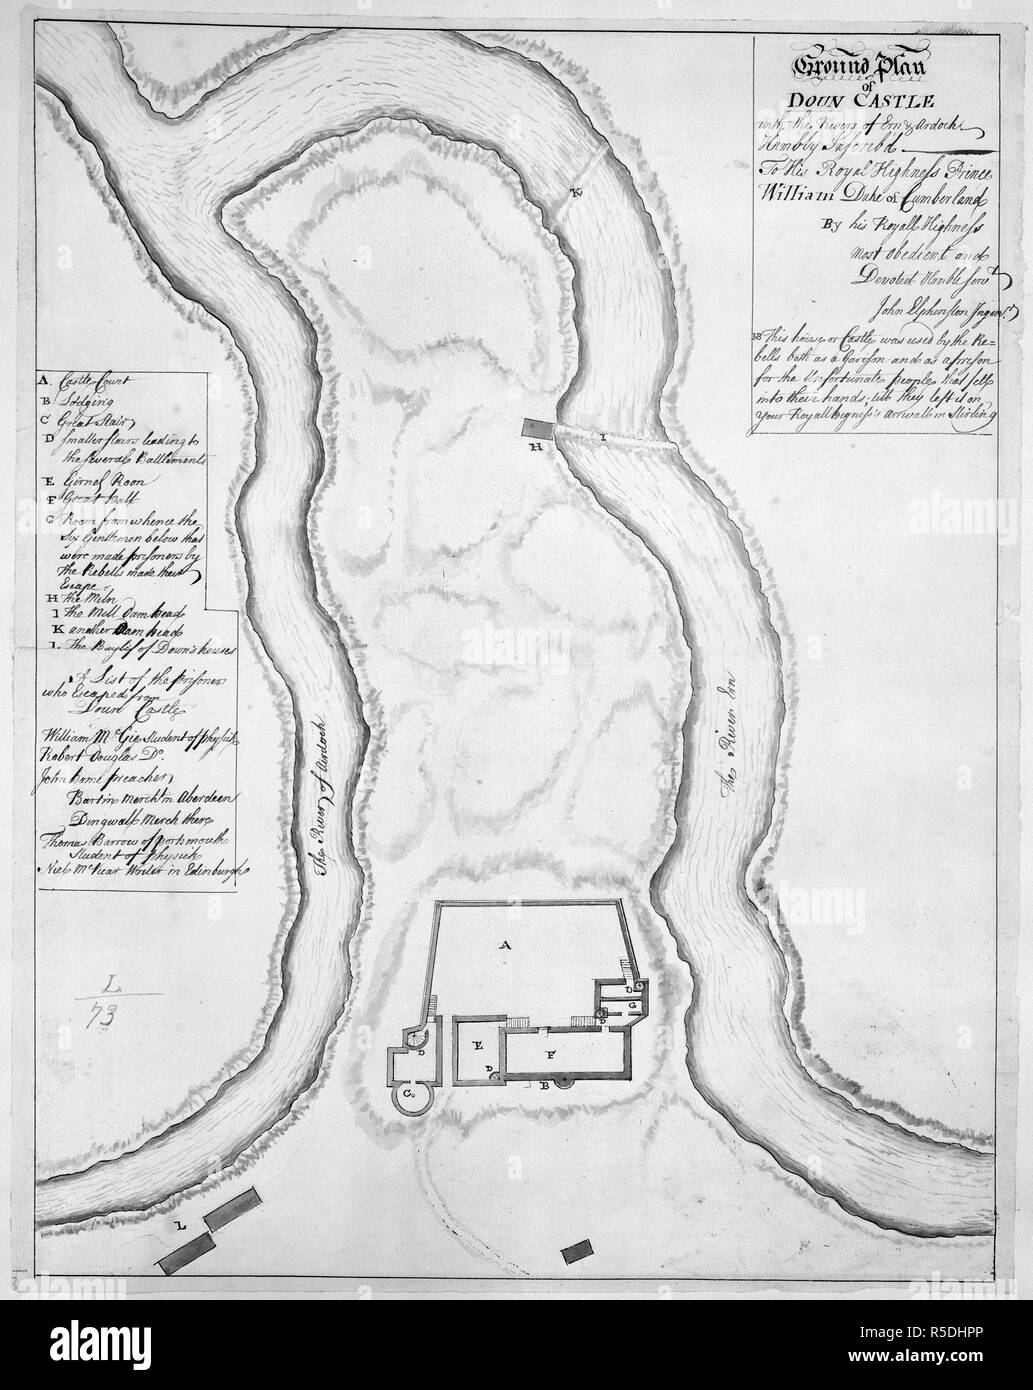 Ground plan of Doun Castle. A ground plan of Doun Castle, with the rivers of E. 1746. A ground plan of Doun Castle, with the rivers of Ern and Ardoch. Ms. 1 f. 2 in. x 11 in.  Image taken from A ground plan of Doun Castle, with the rivers of Ern and Ardoch; drawn by John Elphinstone, Engineer, 1746, and dedicated by him to the Duke of Cumberland.  Originally published/produced in 1746. . Source: Maps.K.Top.50.73,. Language: English. Stock Photo